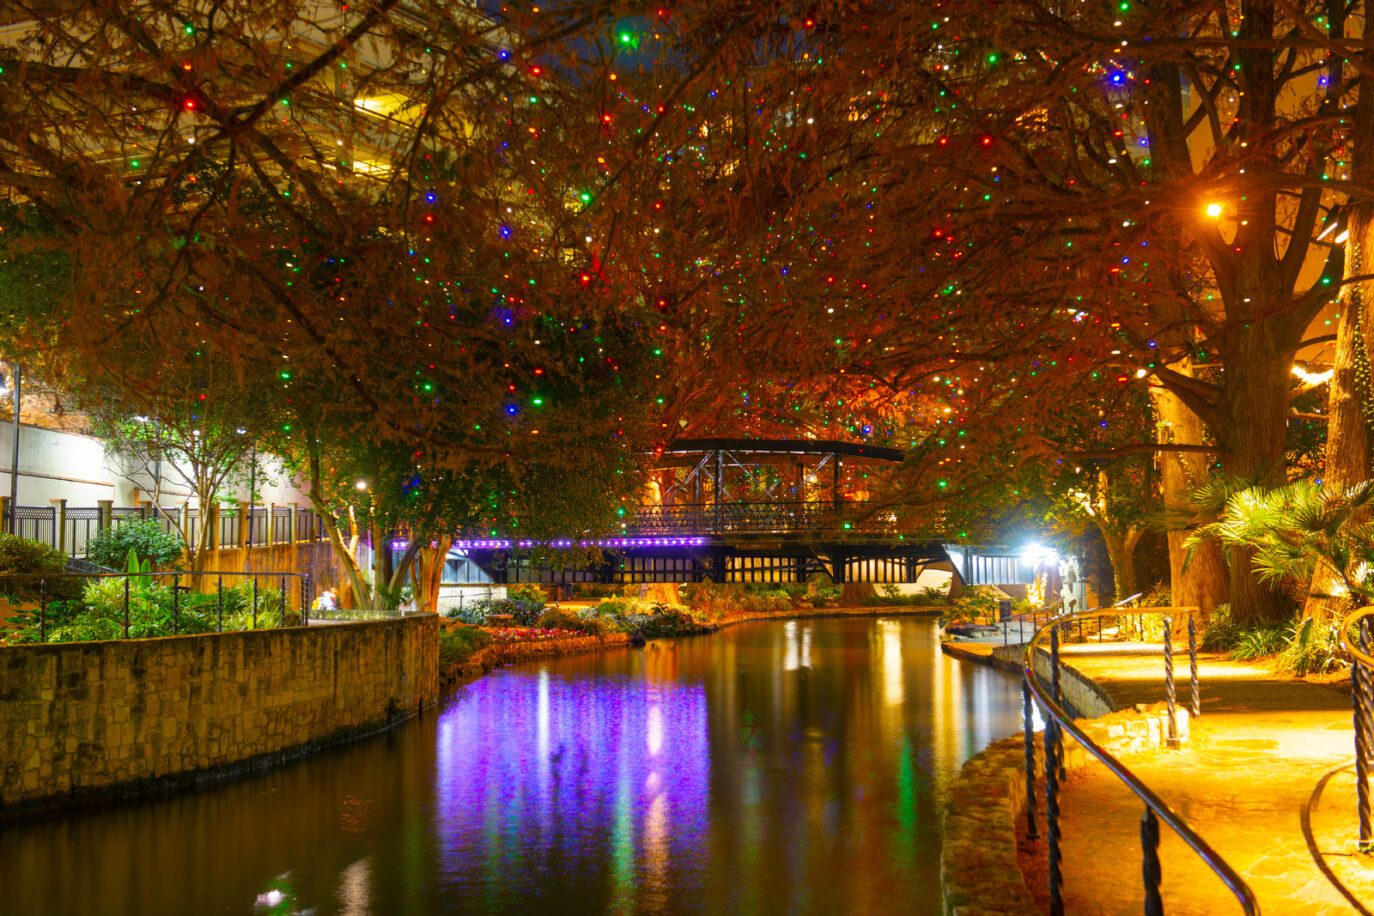 Lights hang from the trees over the San Antonio riverwalk